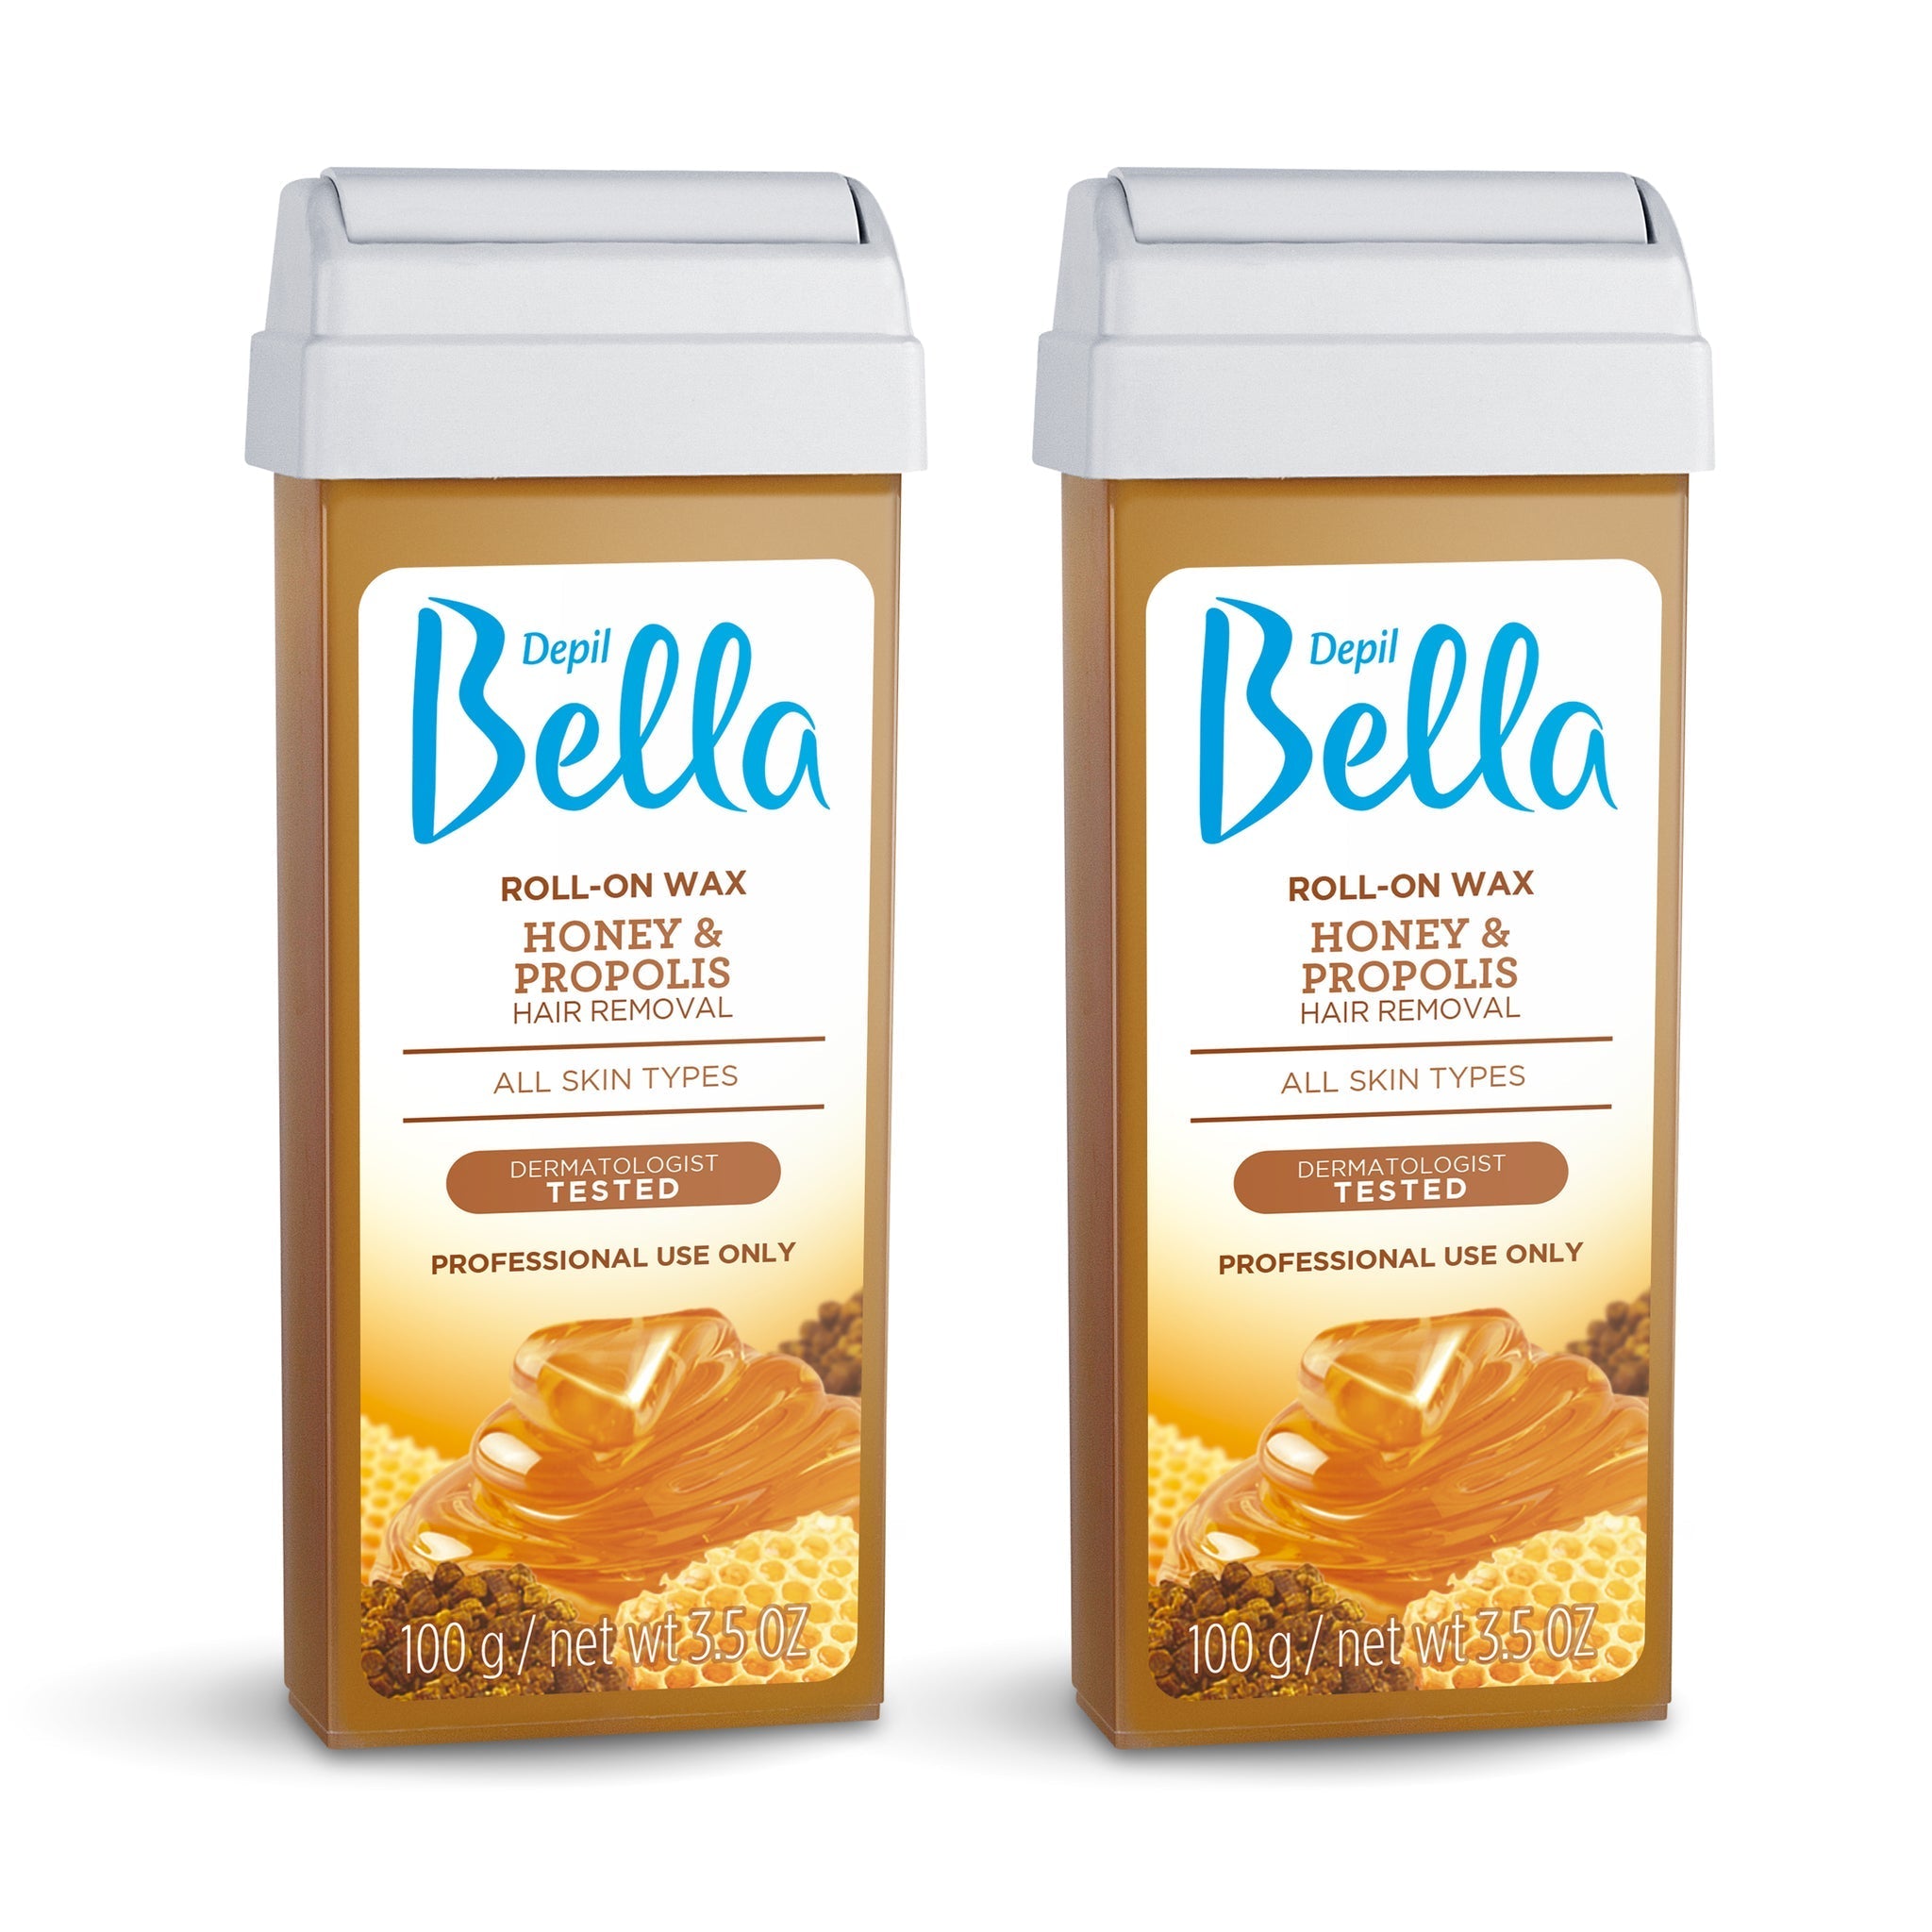 Depil Bella Hair Removal Wax Depil Bella Roll-On Honey with Propolis Wax Hair Removal Cartridges 3.52Oz (2 Units )